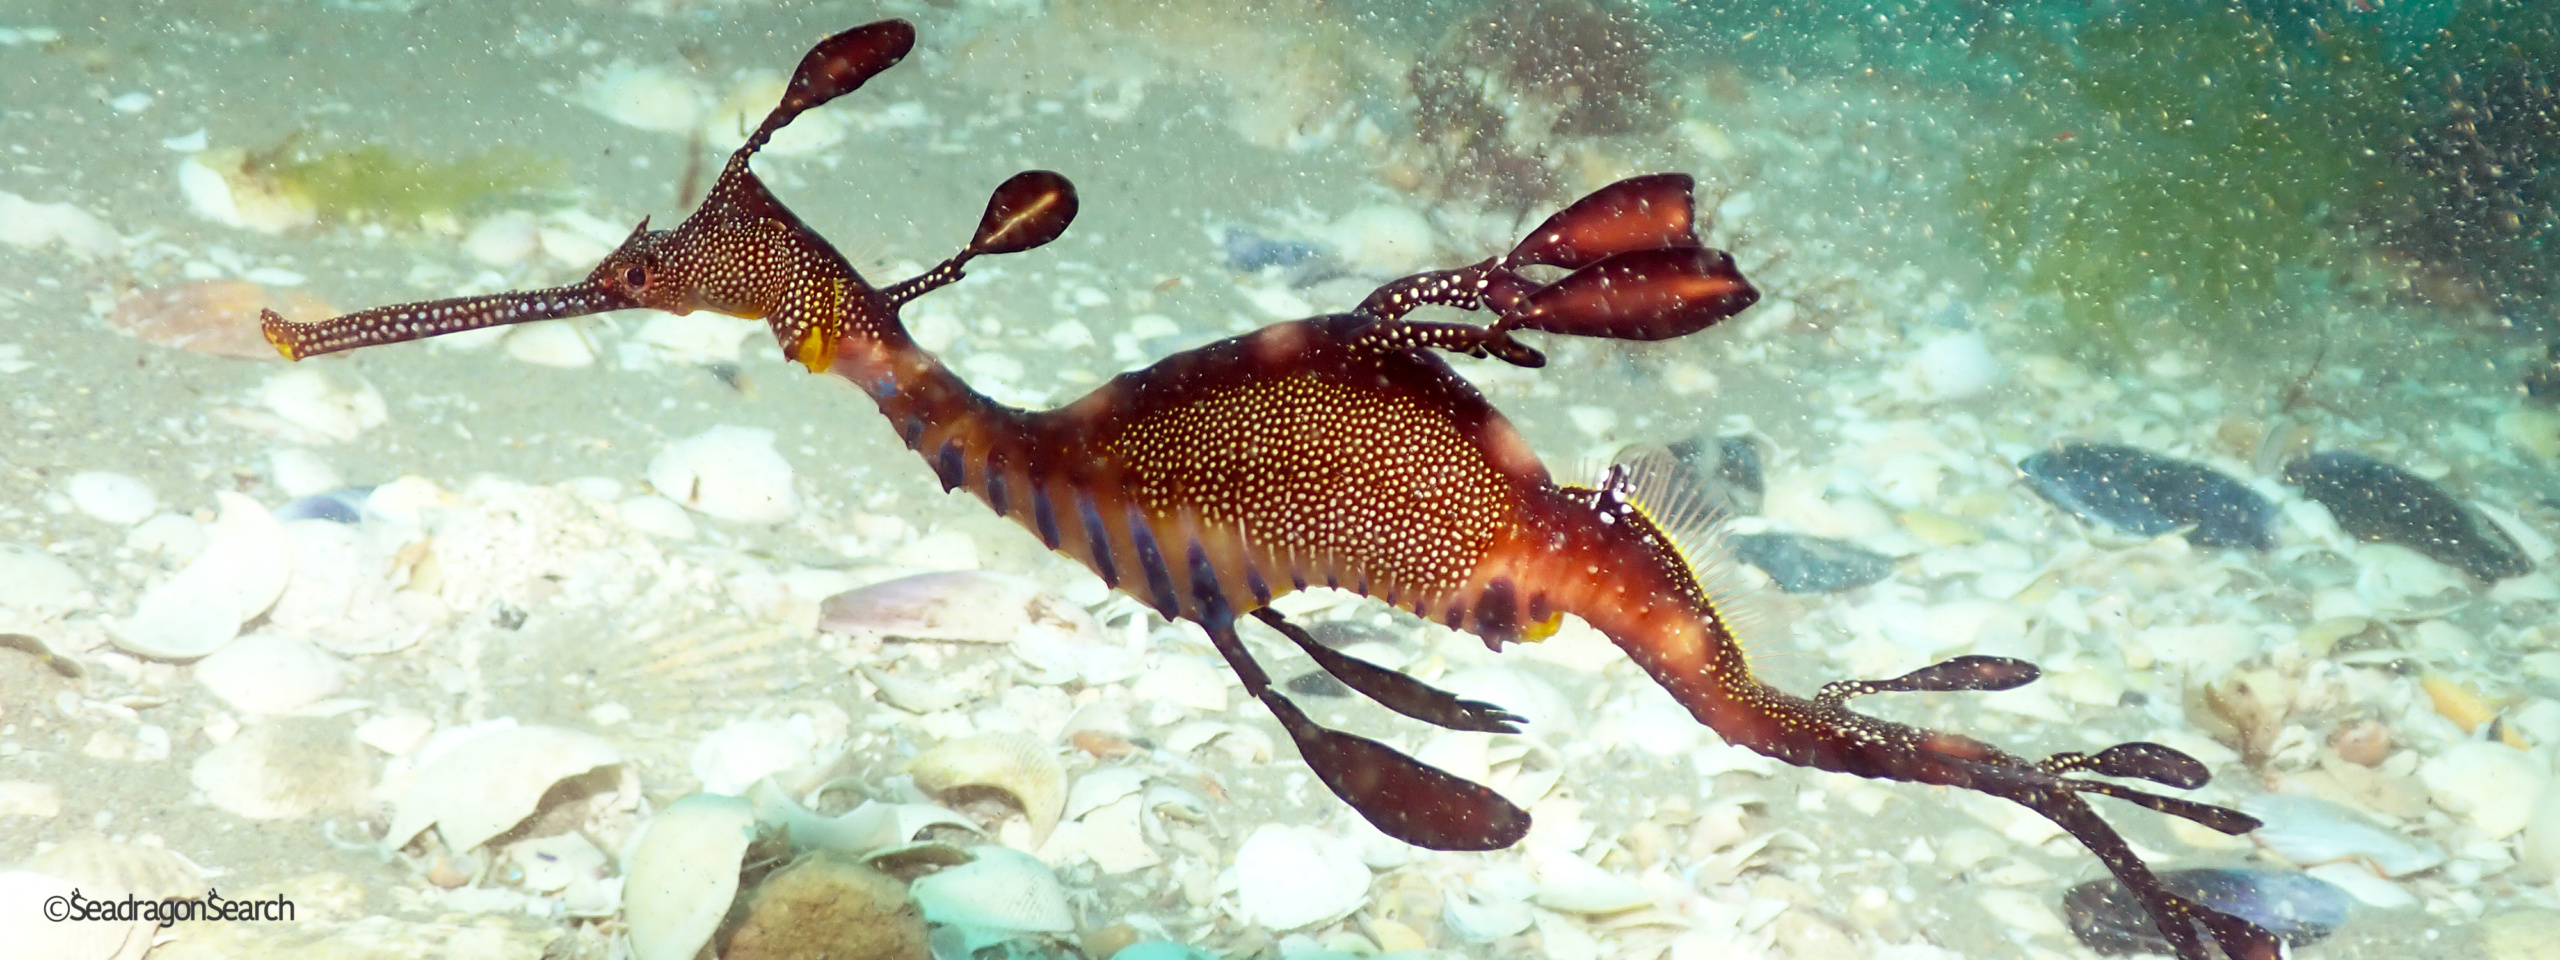 Connectivity and Resilience in Seadragon Populations